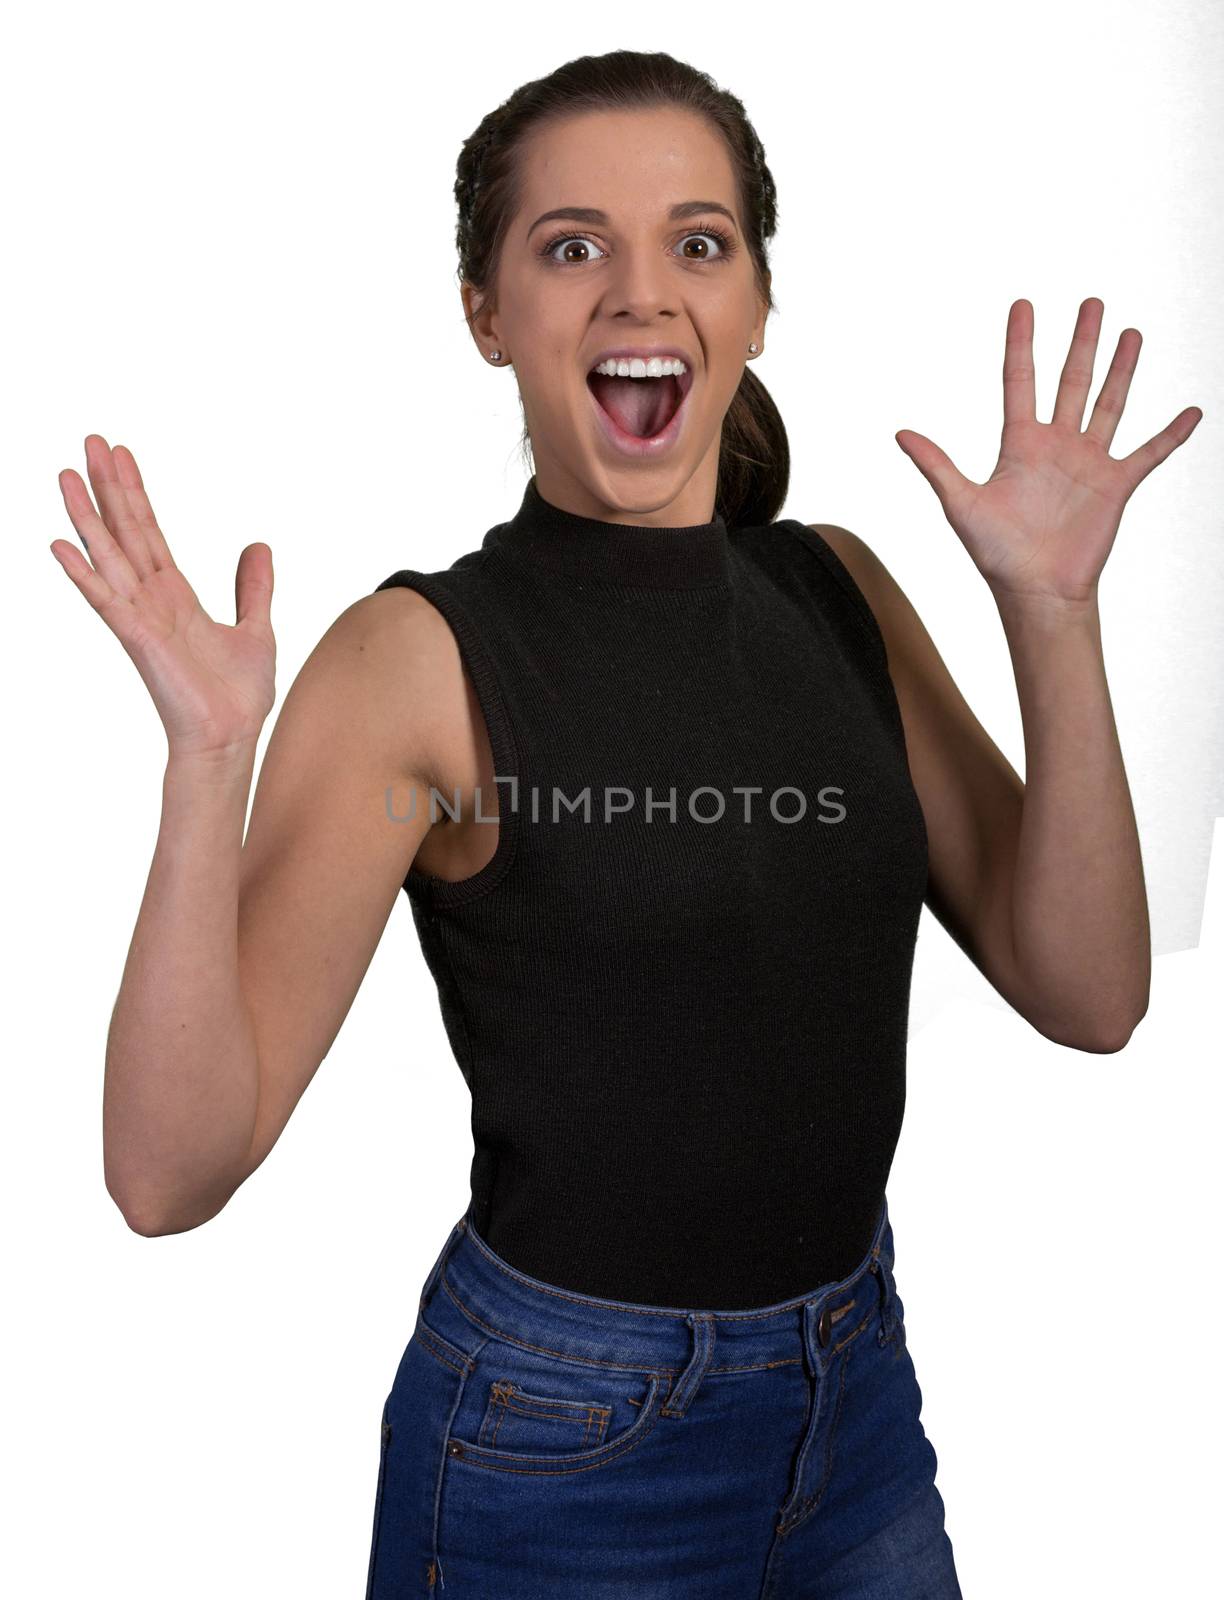 Pretty young lady with excited expression and hands out stretched